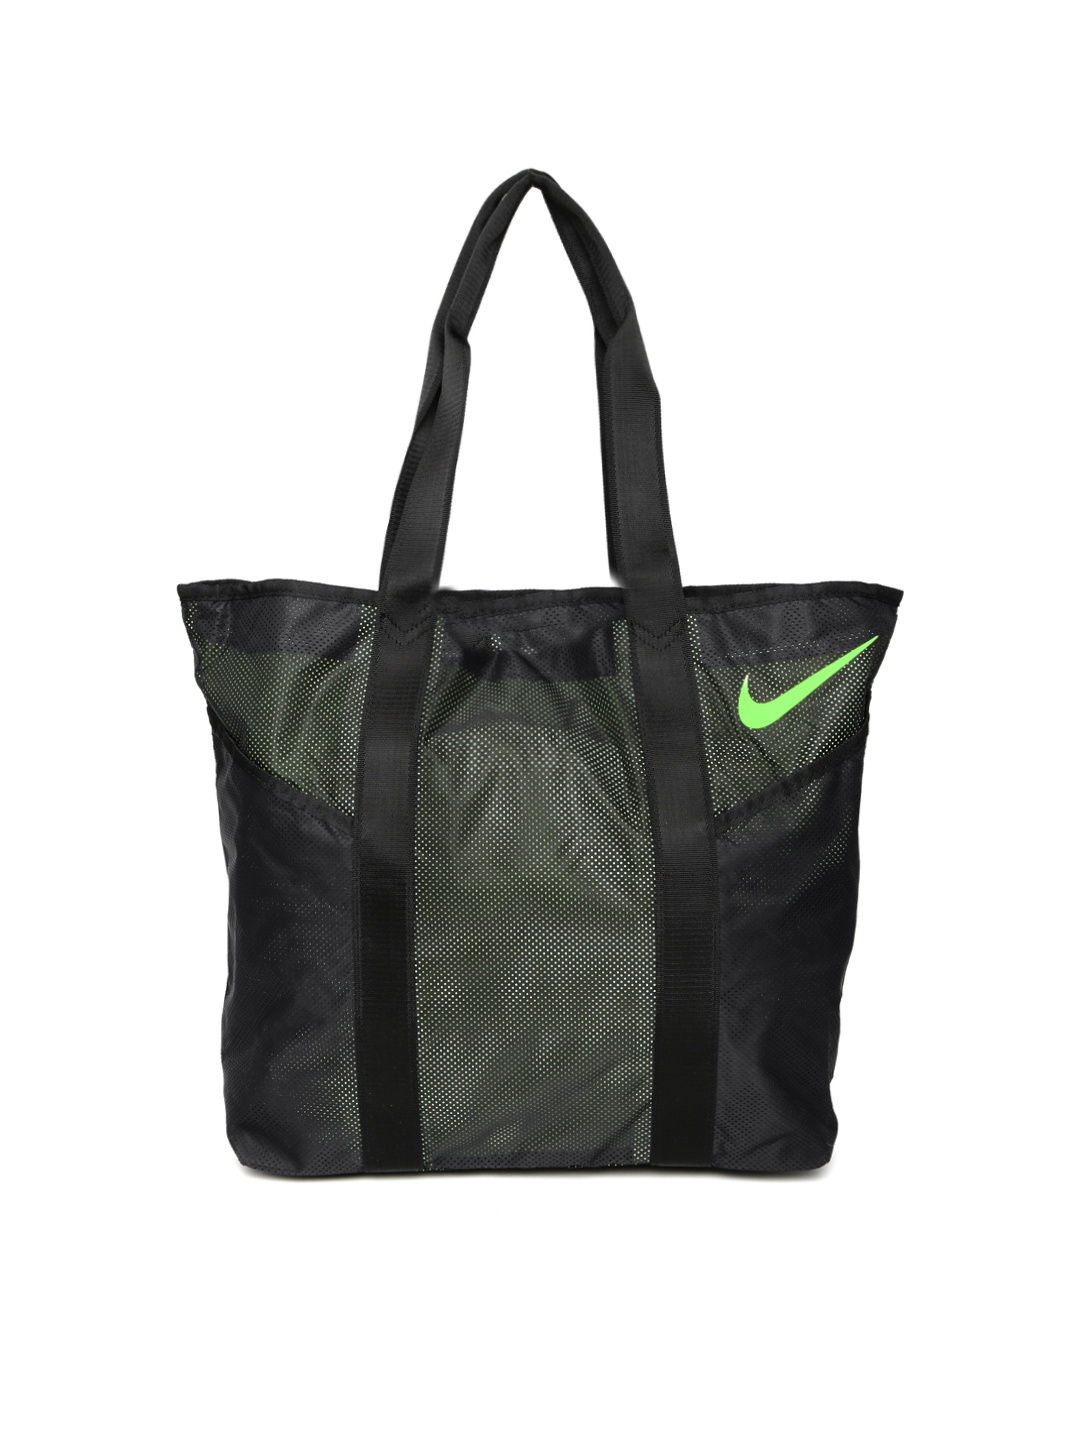 Home Accessories Women Accessories Tote Bags Nike Tote Bags